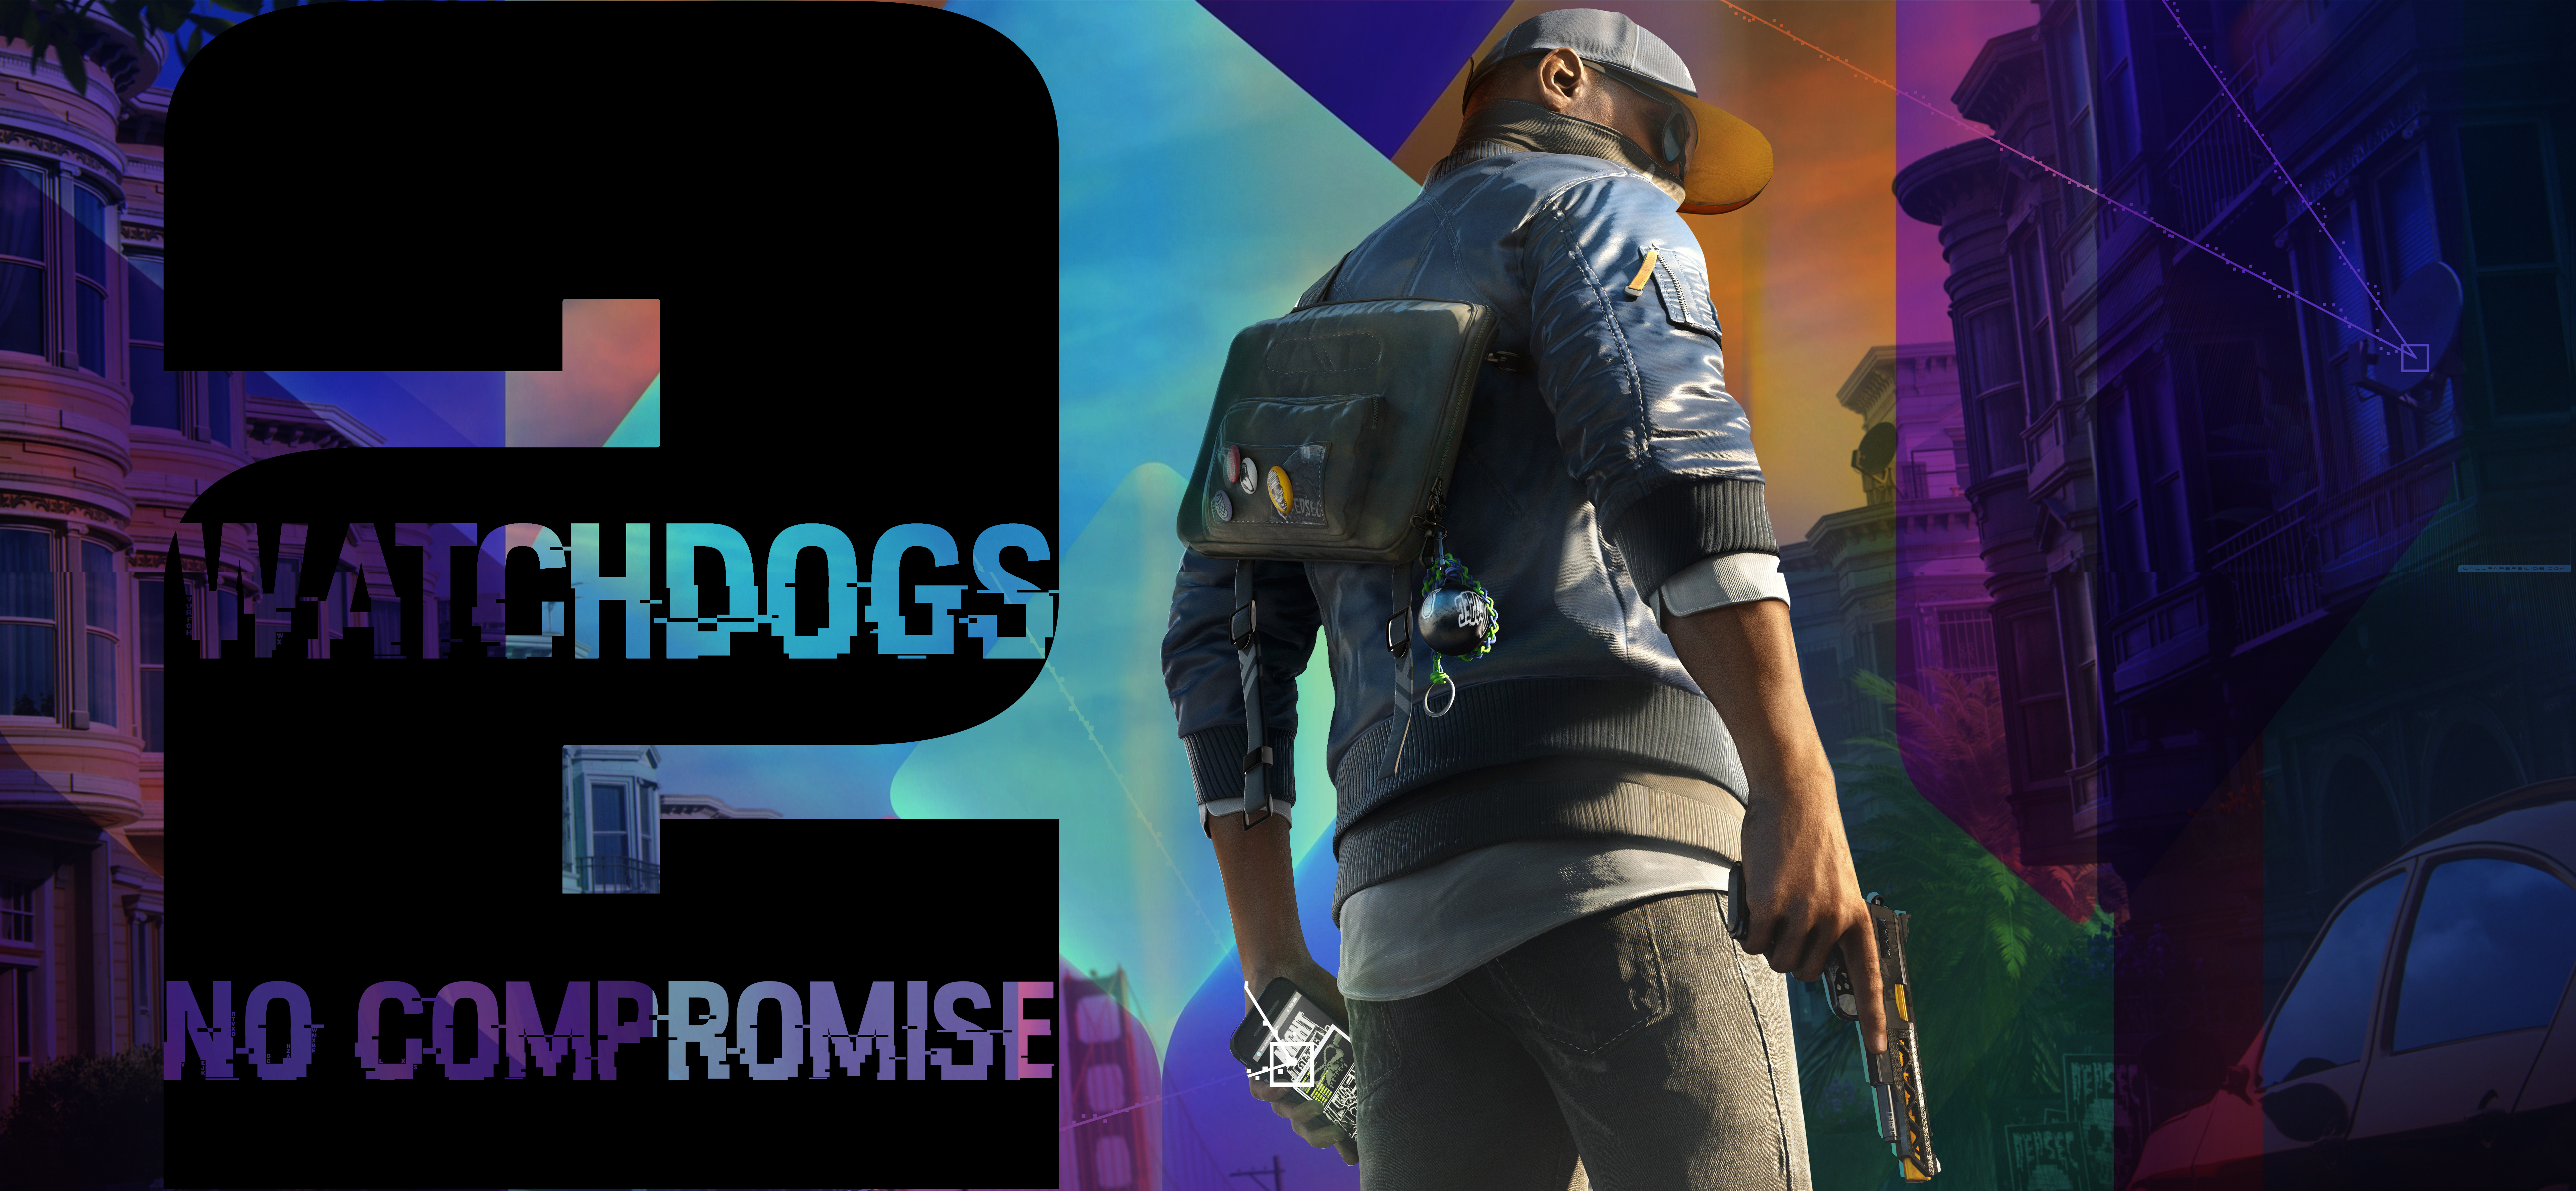 Video Game Watch Dogs 2 7680x3552